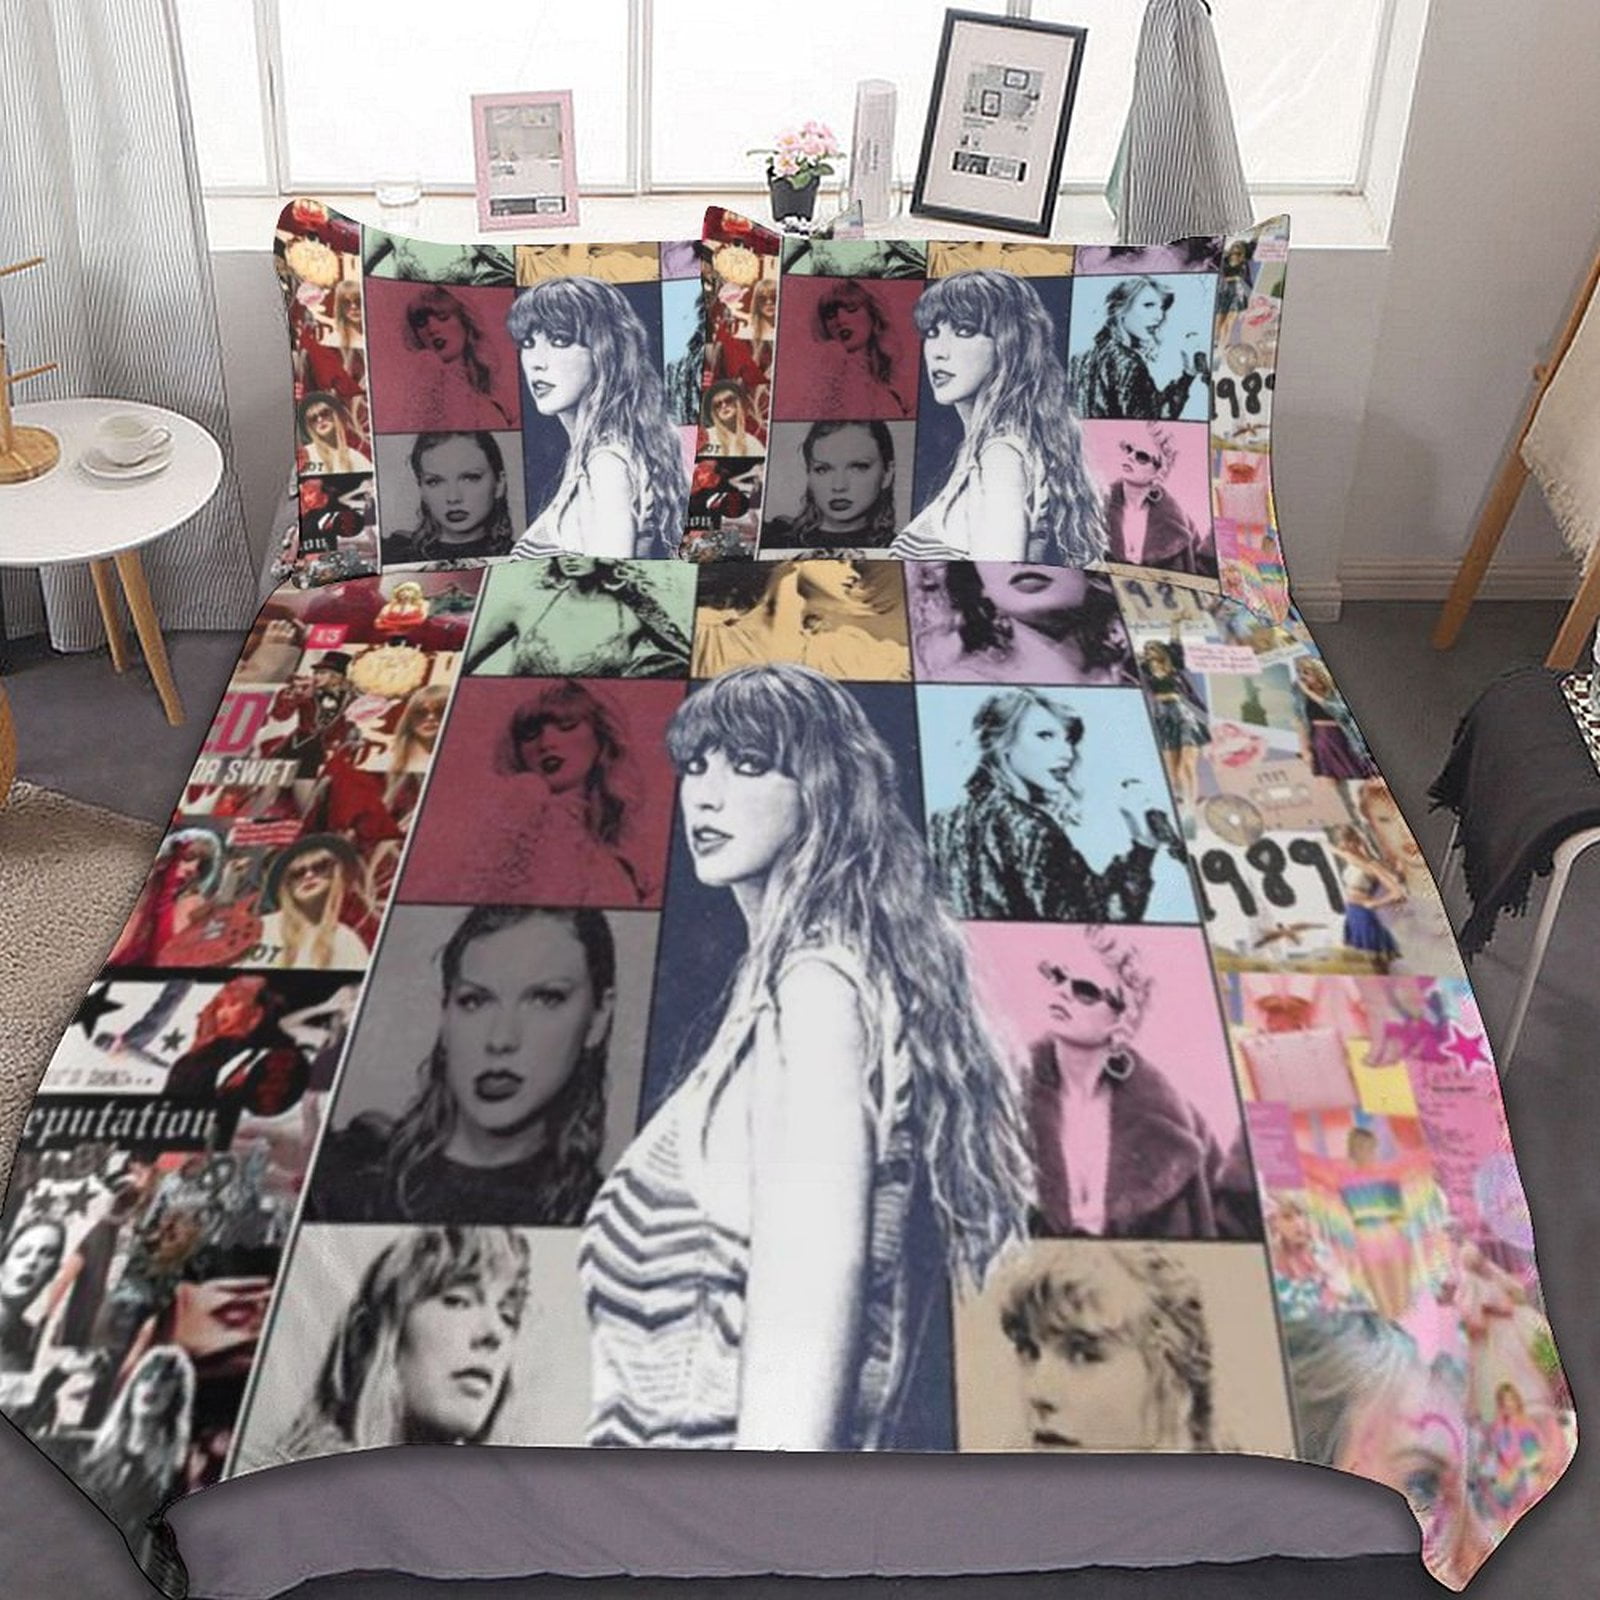 Taylor Swift Singer 4 3 Pieces Bedding Sets Soft Comforter Sets Decor Bedroom Gifts with 1 Duvet Cover 2 Pillowcases, Size: 90 x 90